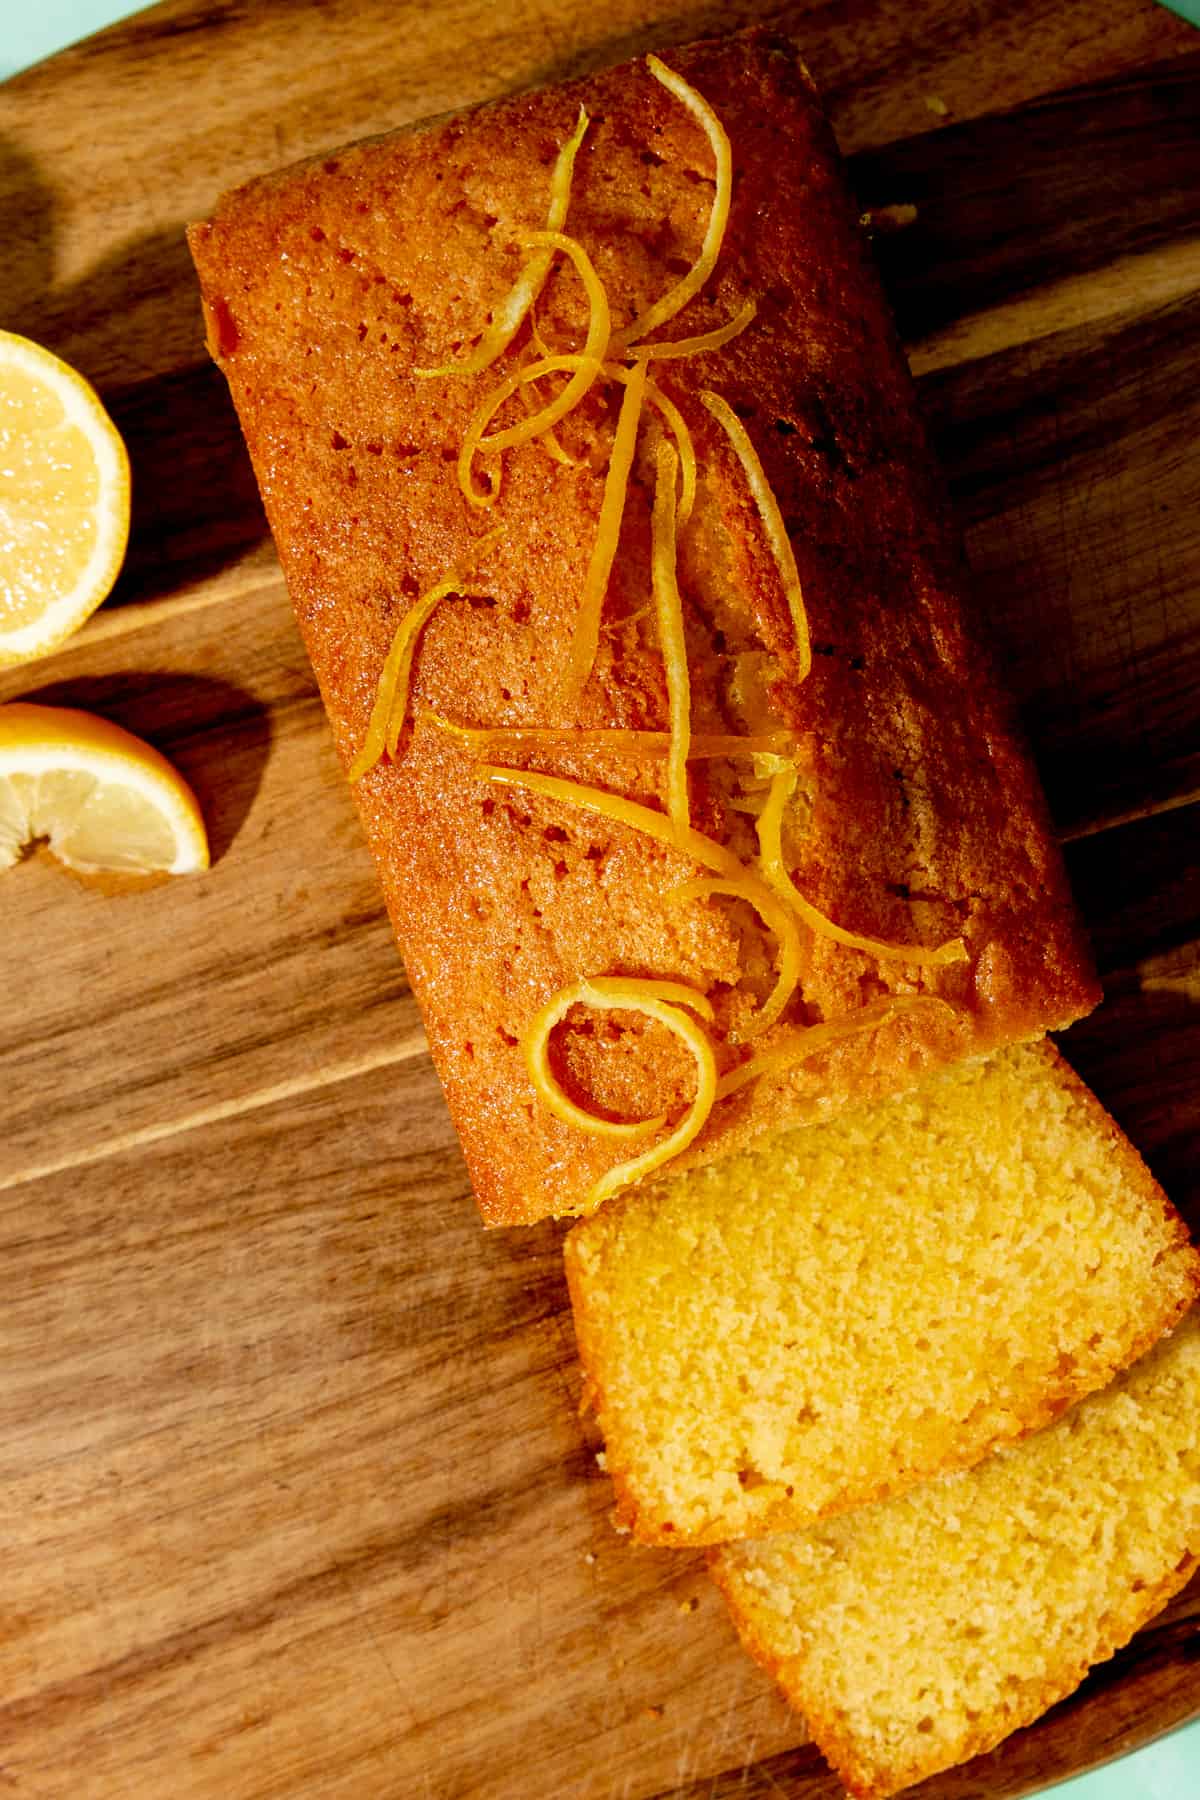 Overhead shot of golden browned rectangular cake with a slice cut in front and lemon sliced on the wood board background.